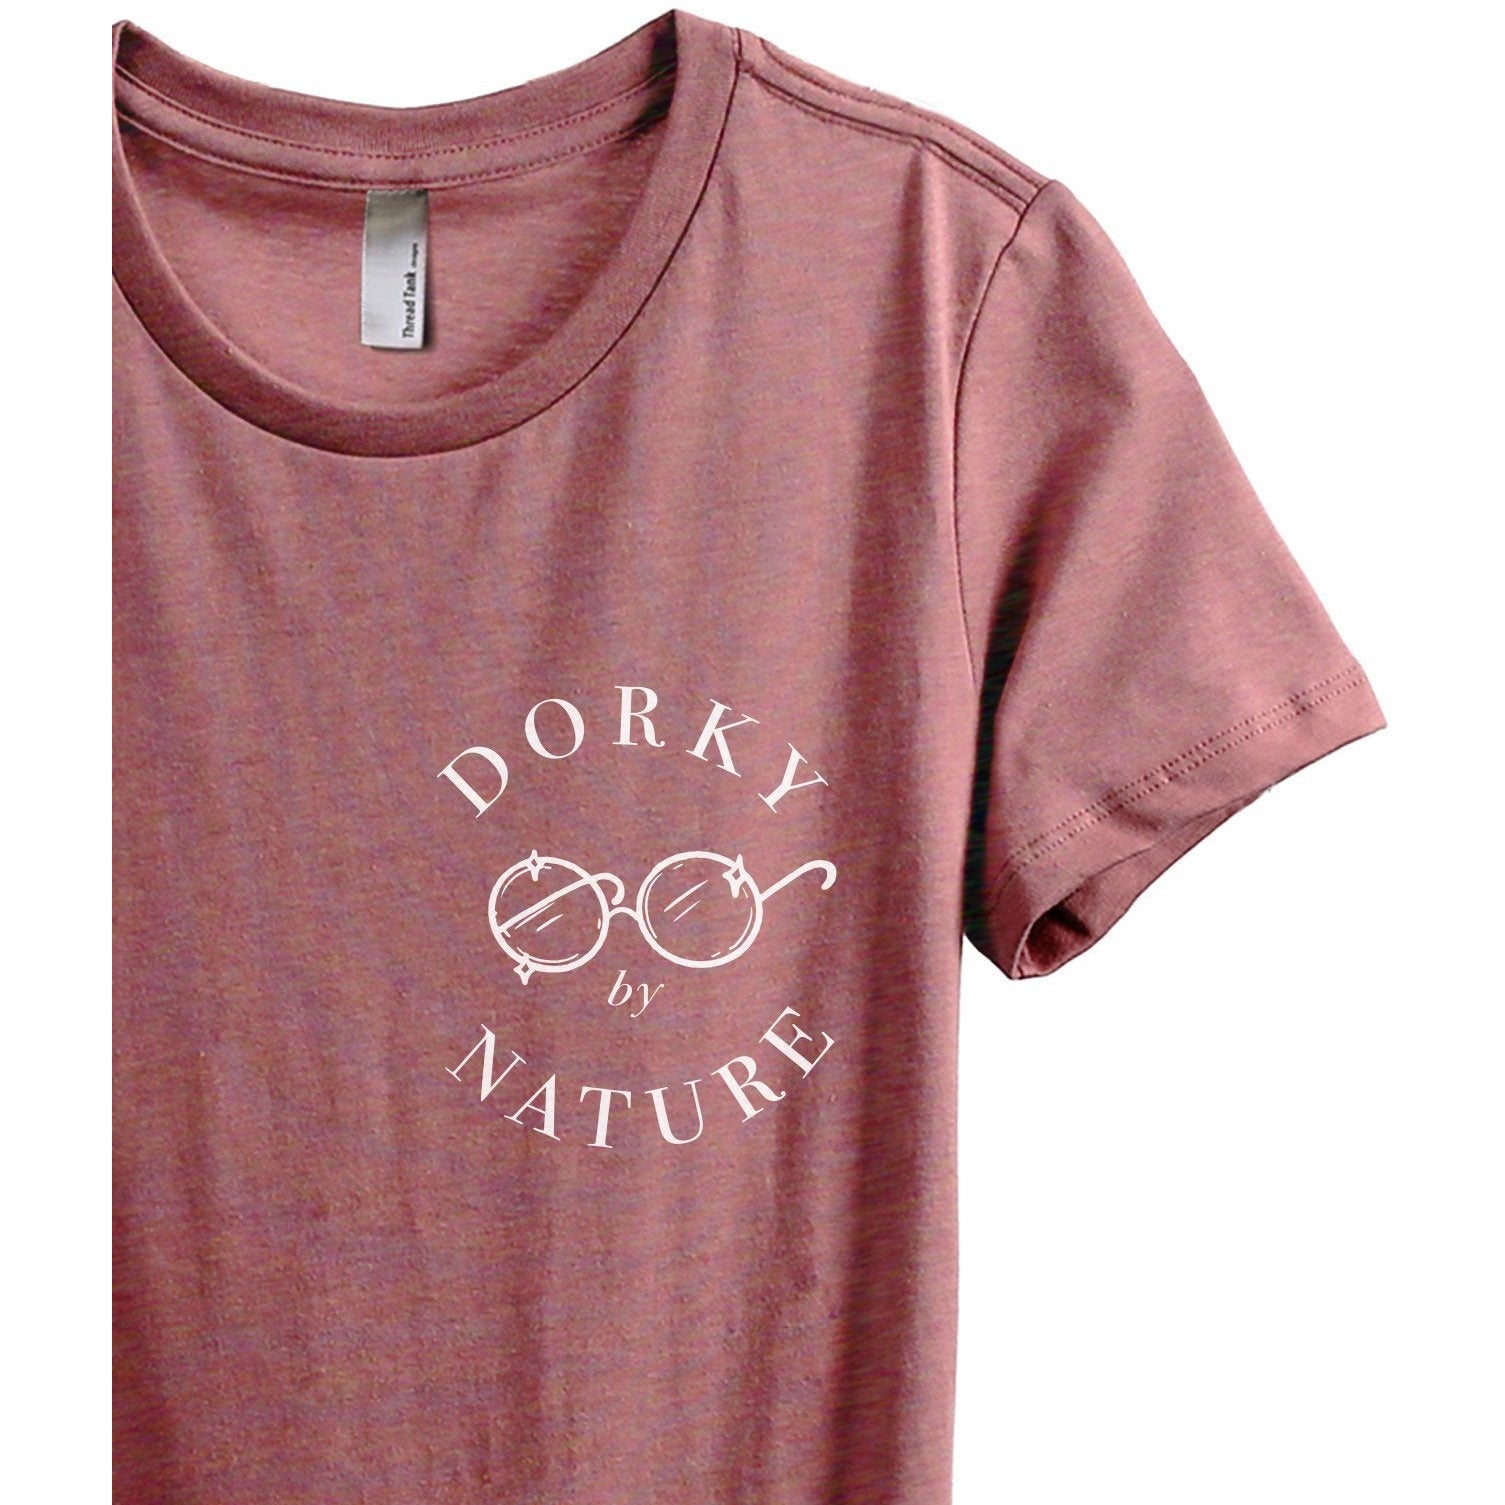 Dorky By Nature Women's Relaxed Crewneck T-Shirt Top Tee Heather Rouge Zoom Details
